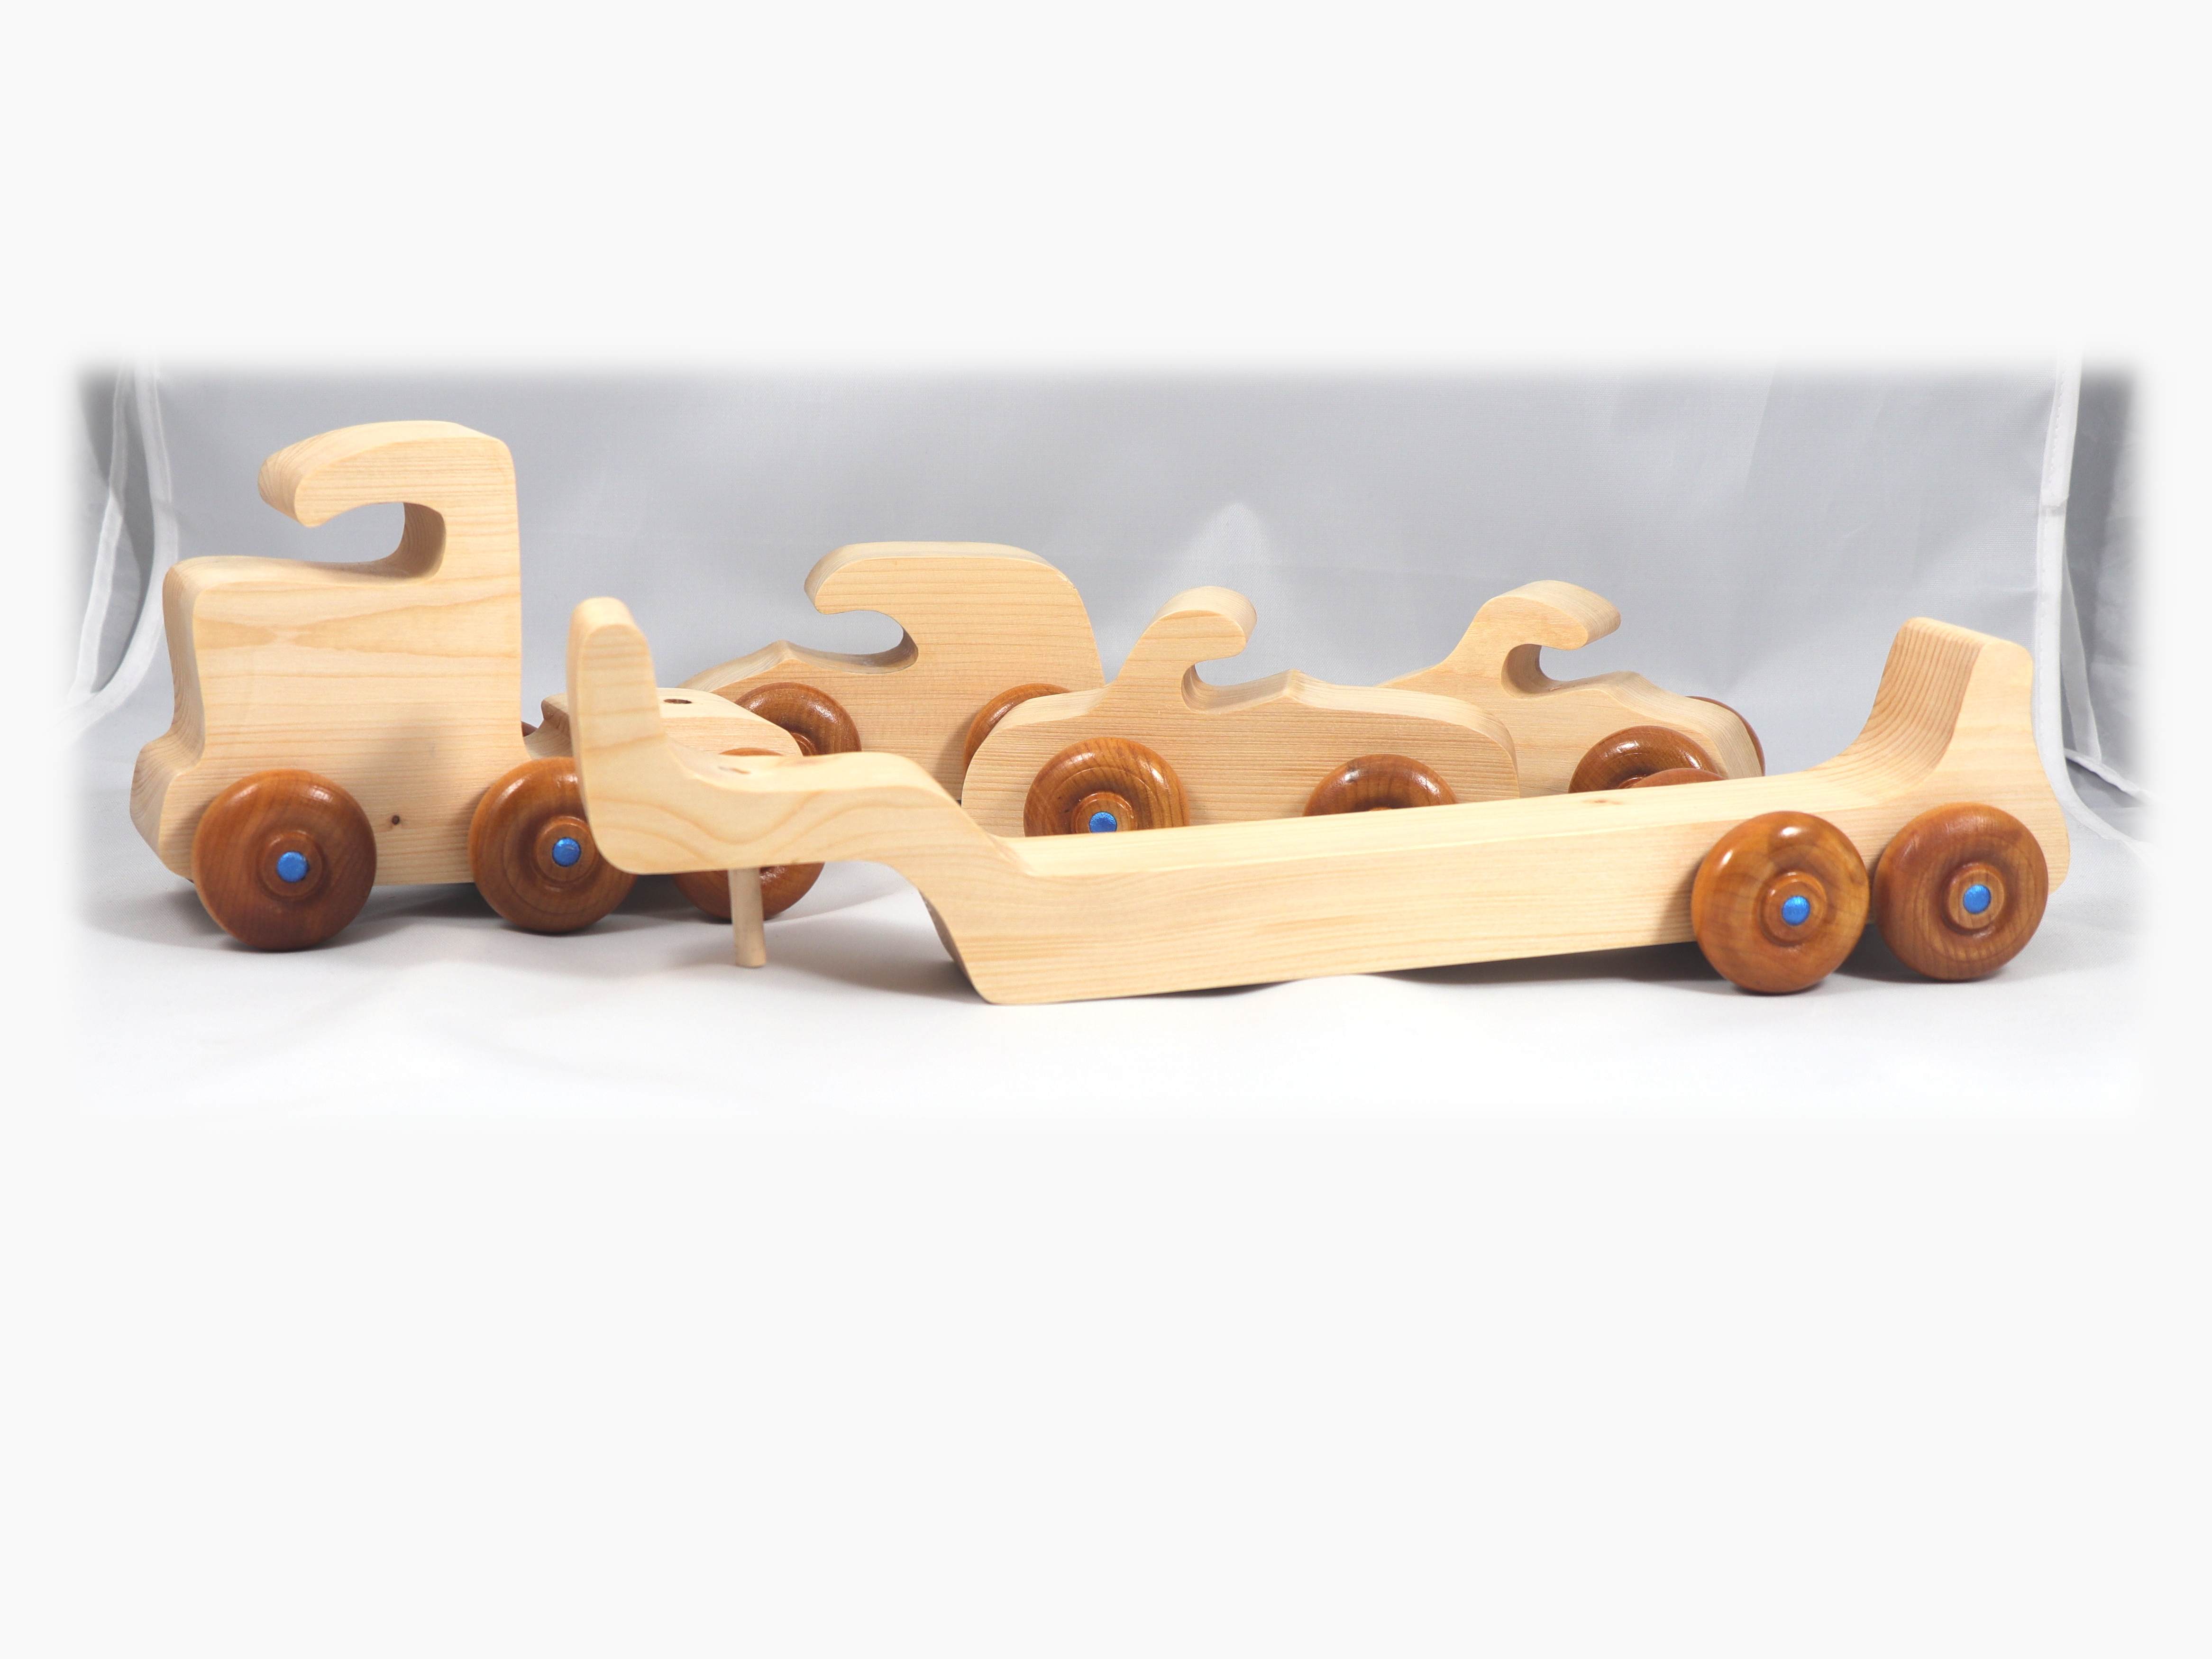 Handmade wooden toy truck play set includes three cars and a tractor-trailer finished with clear and amber shellac with metallic sapphire blue trim.